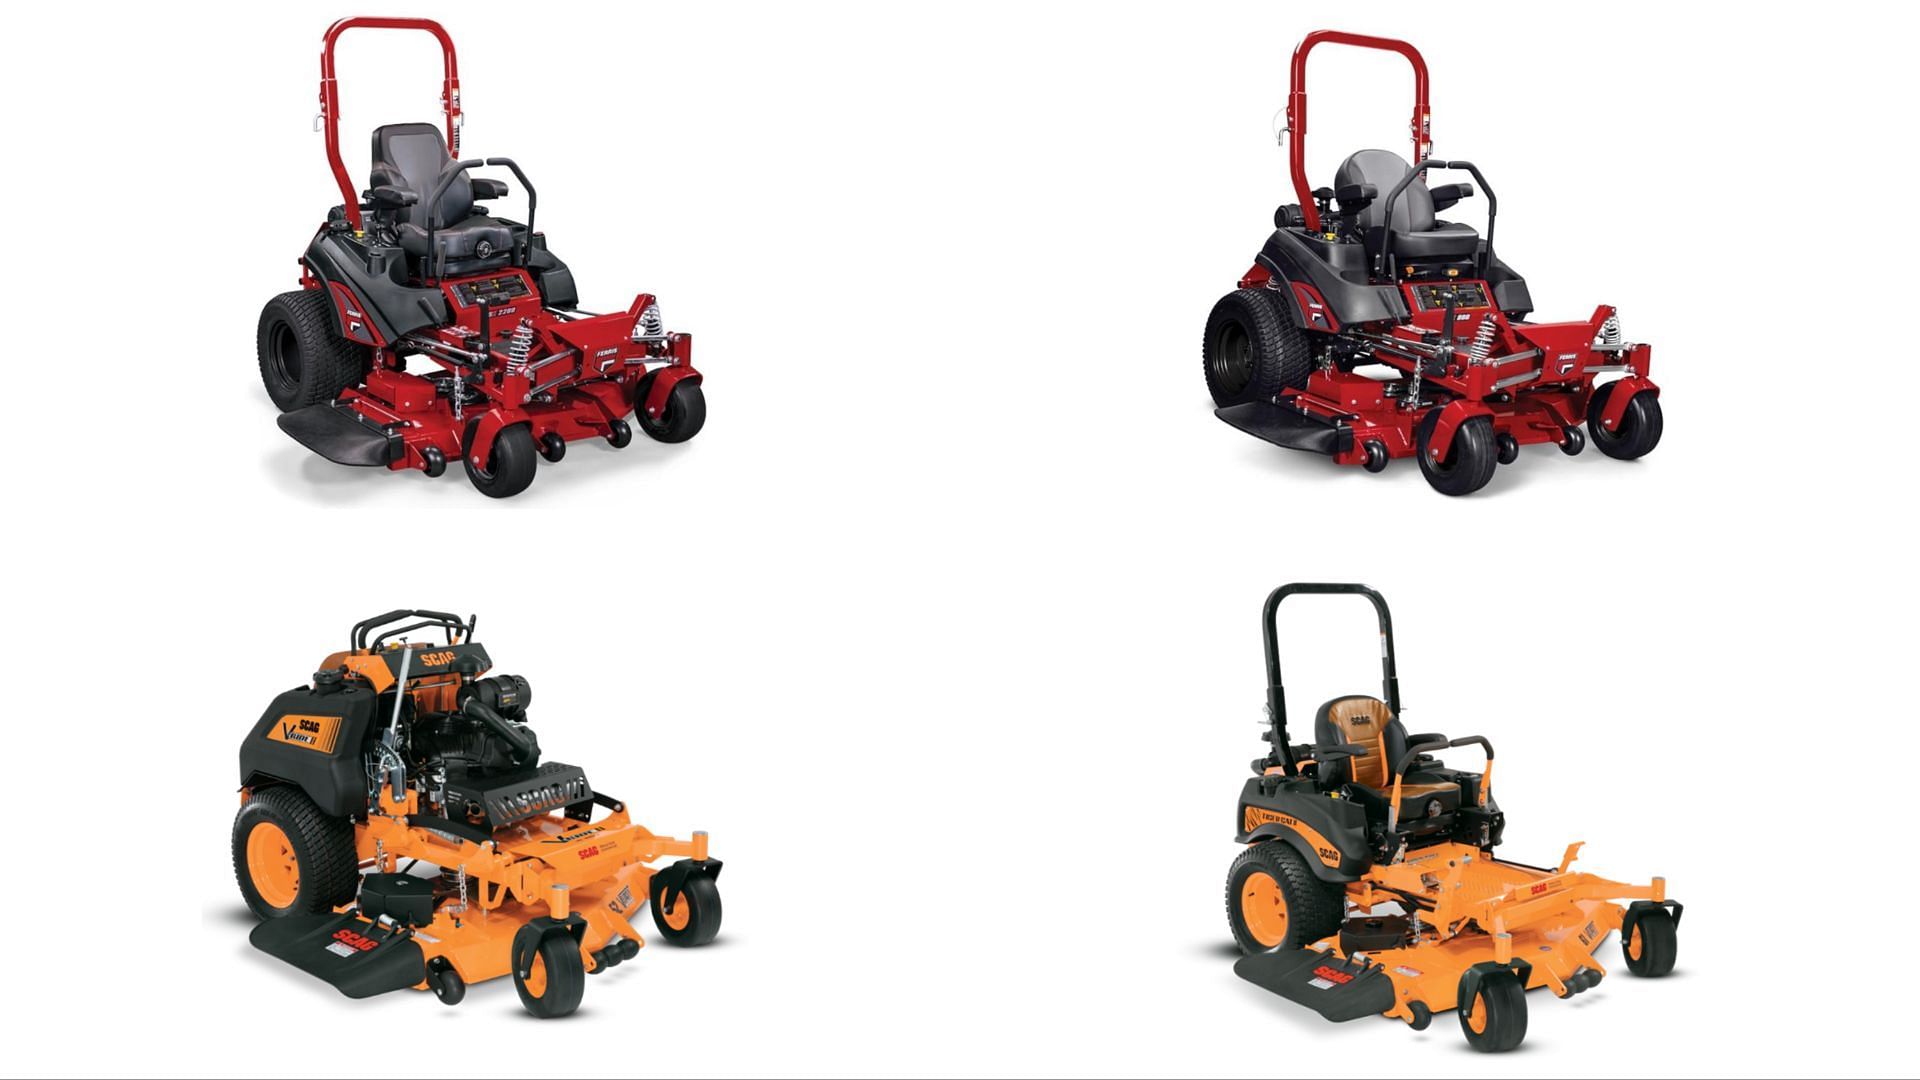 About 33,000 FT730V-EFI Kawasaki Lawn Mower Engines are being recalled over fire hazard concerns (Image via CPSC/Kawasaki)